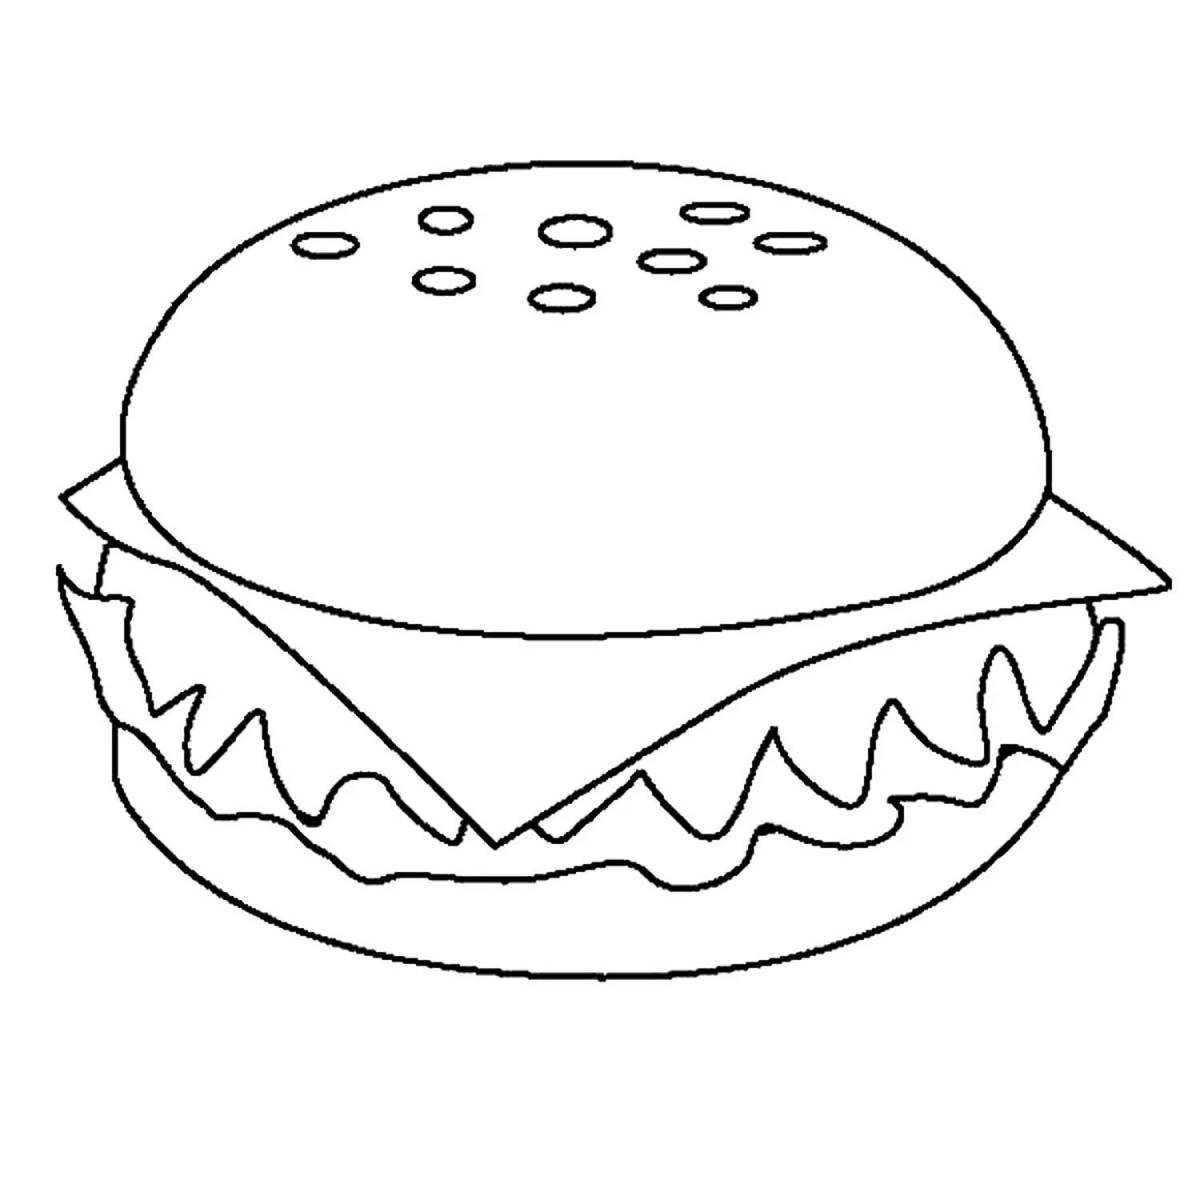 Tempting light food coloring page